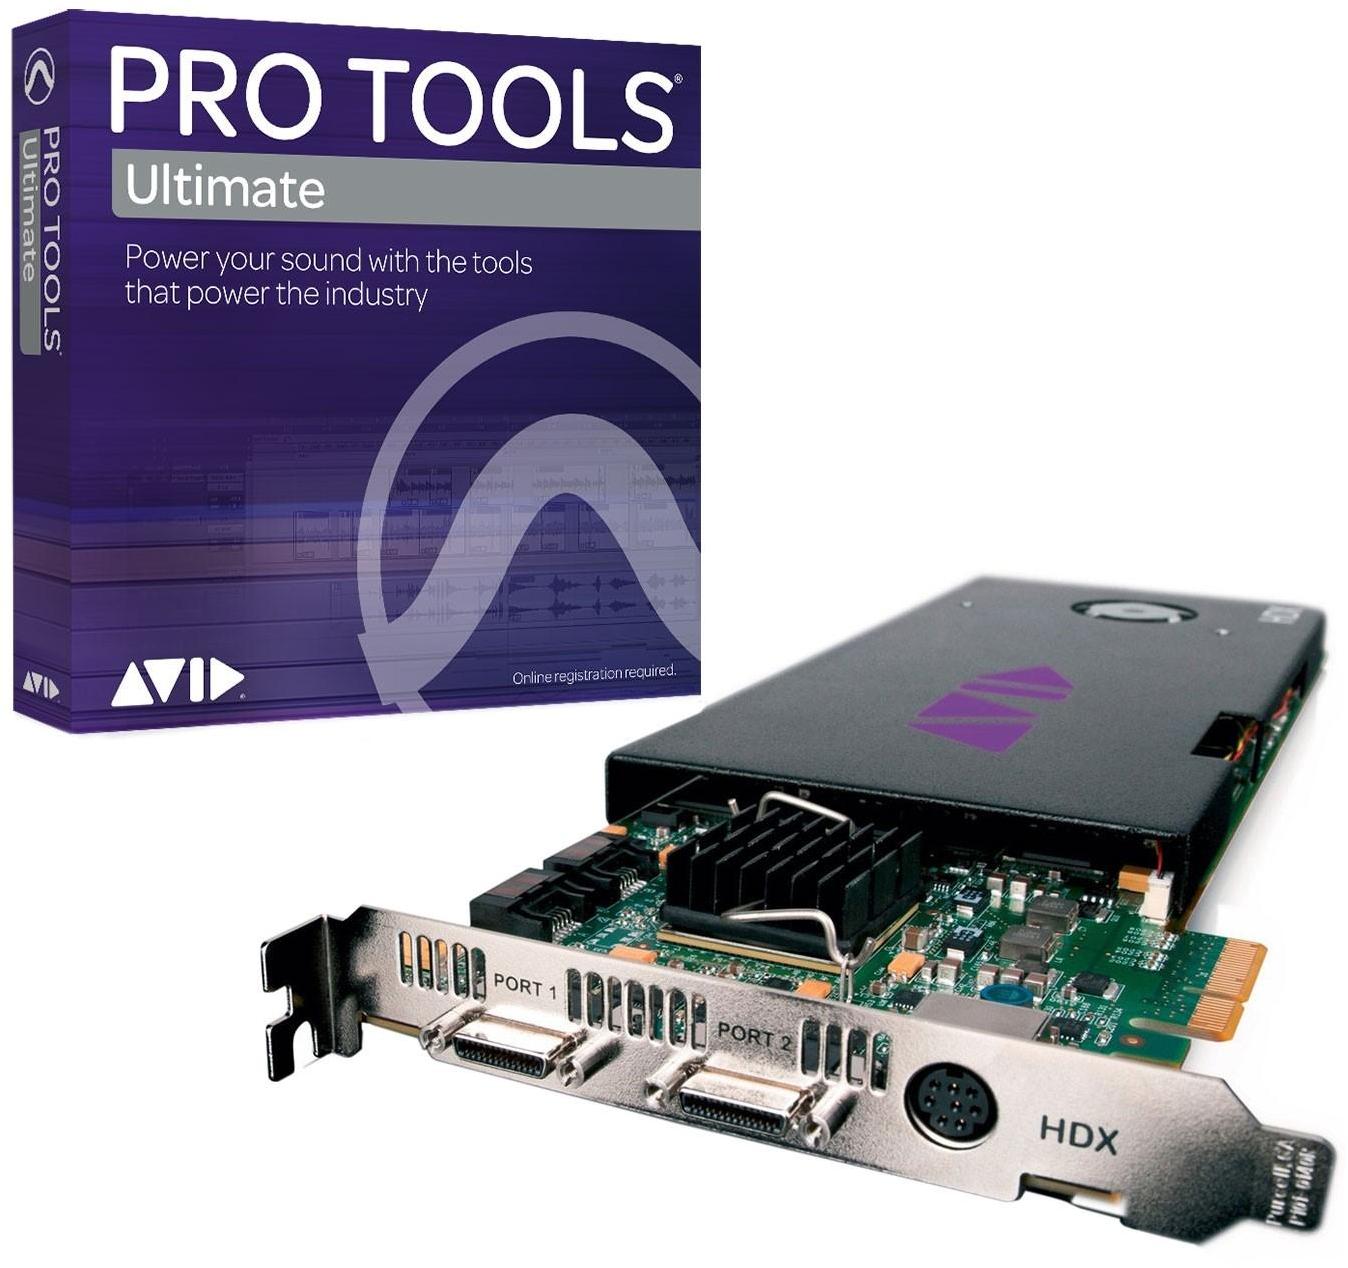 Système hd protools Avid AVID PCIe HDX CORE WITH PRO TOOLS ULTIMATE